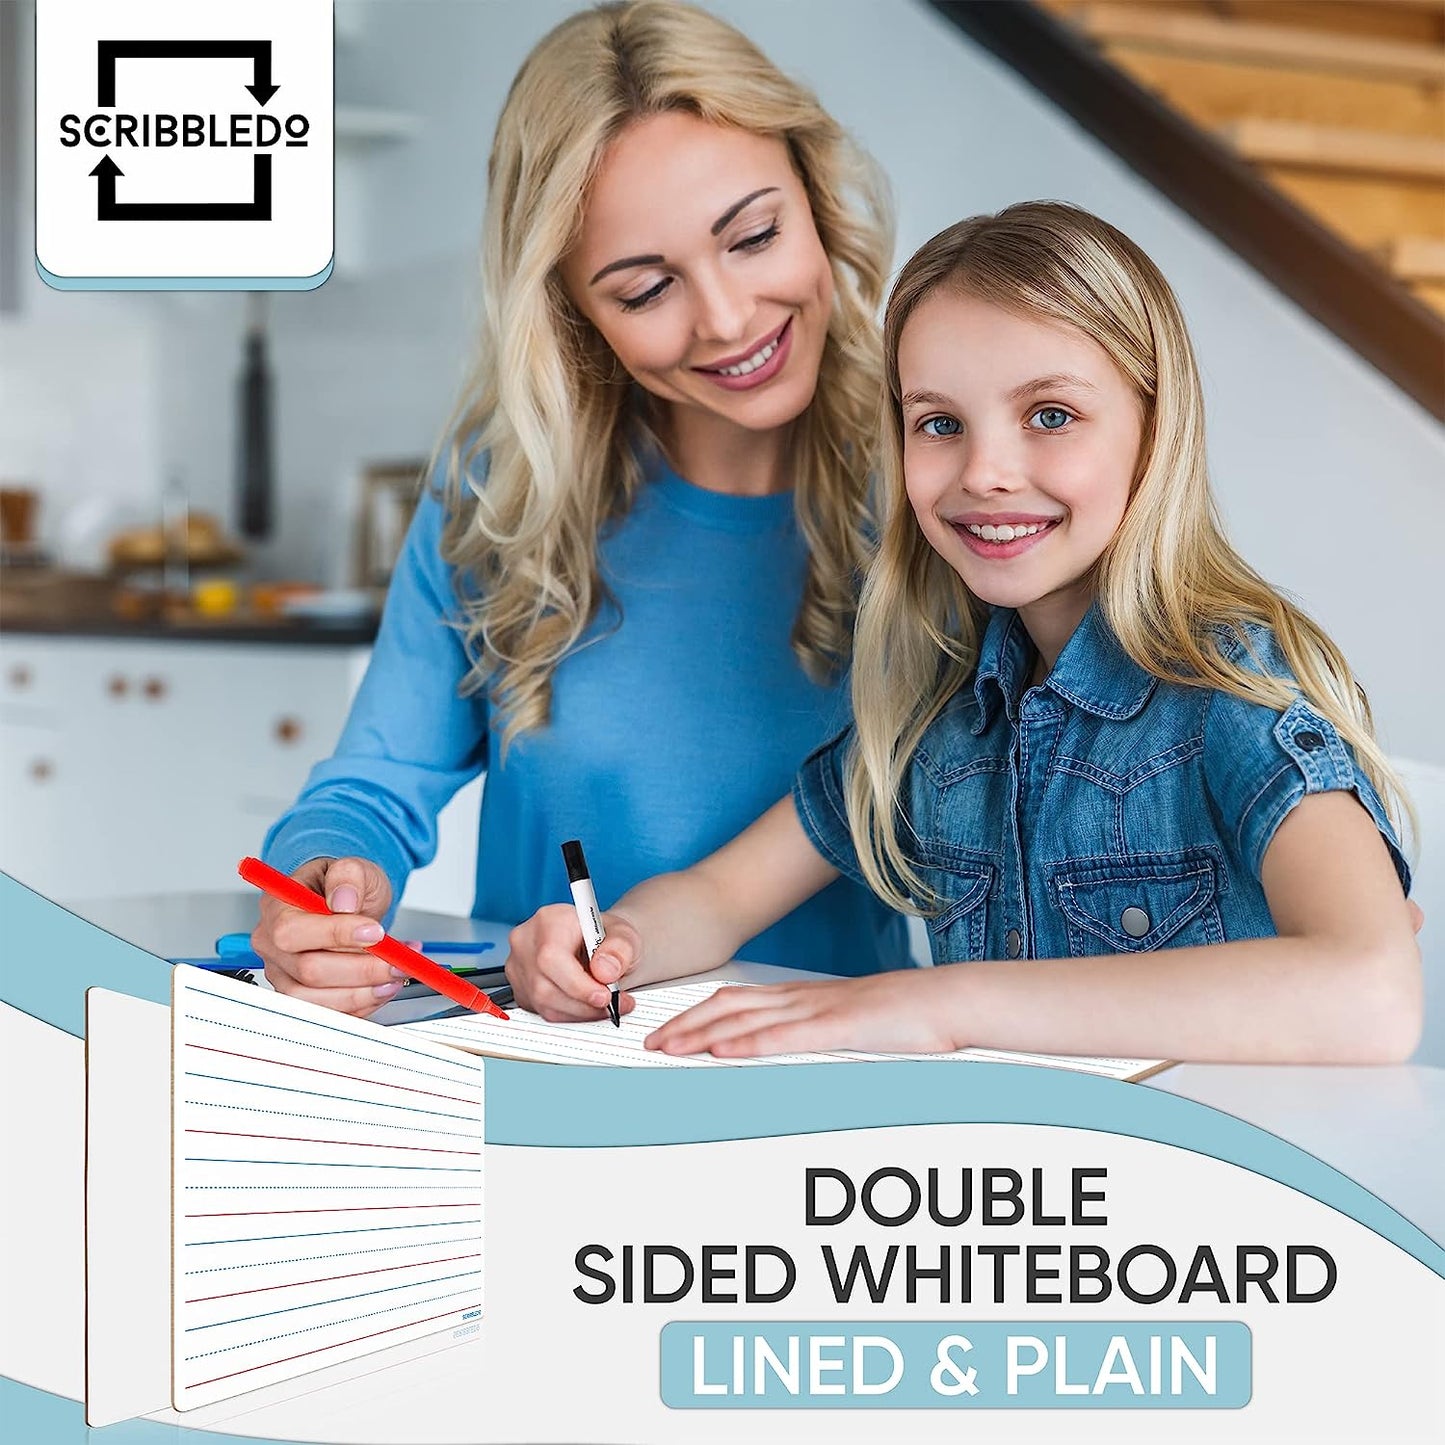 9x12 double sided whiteboard with lines